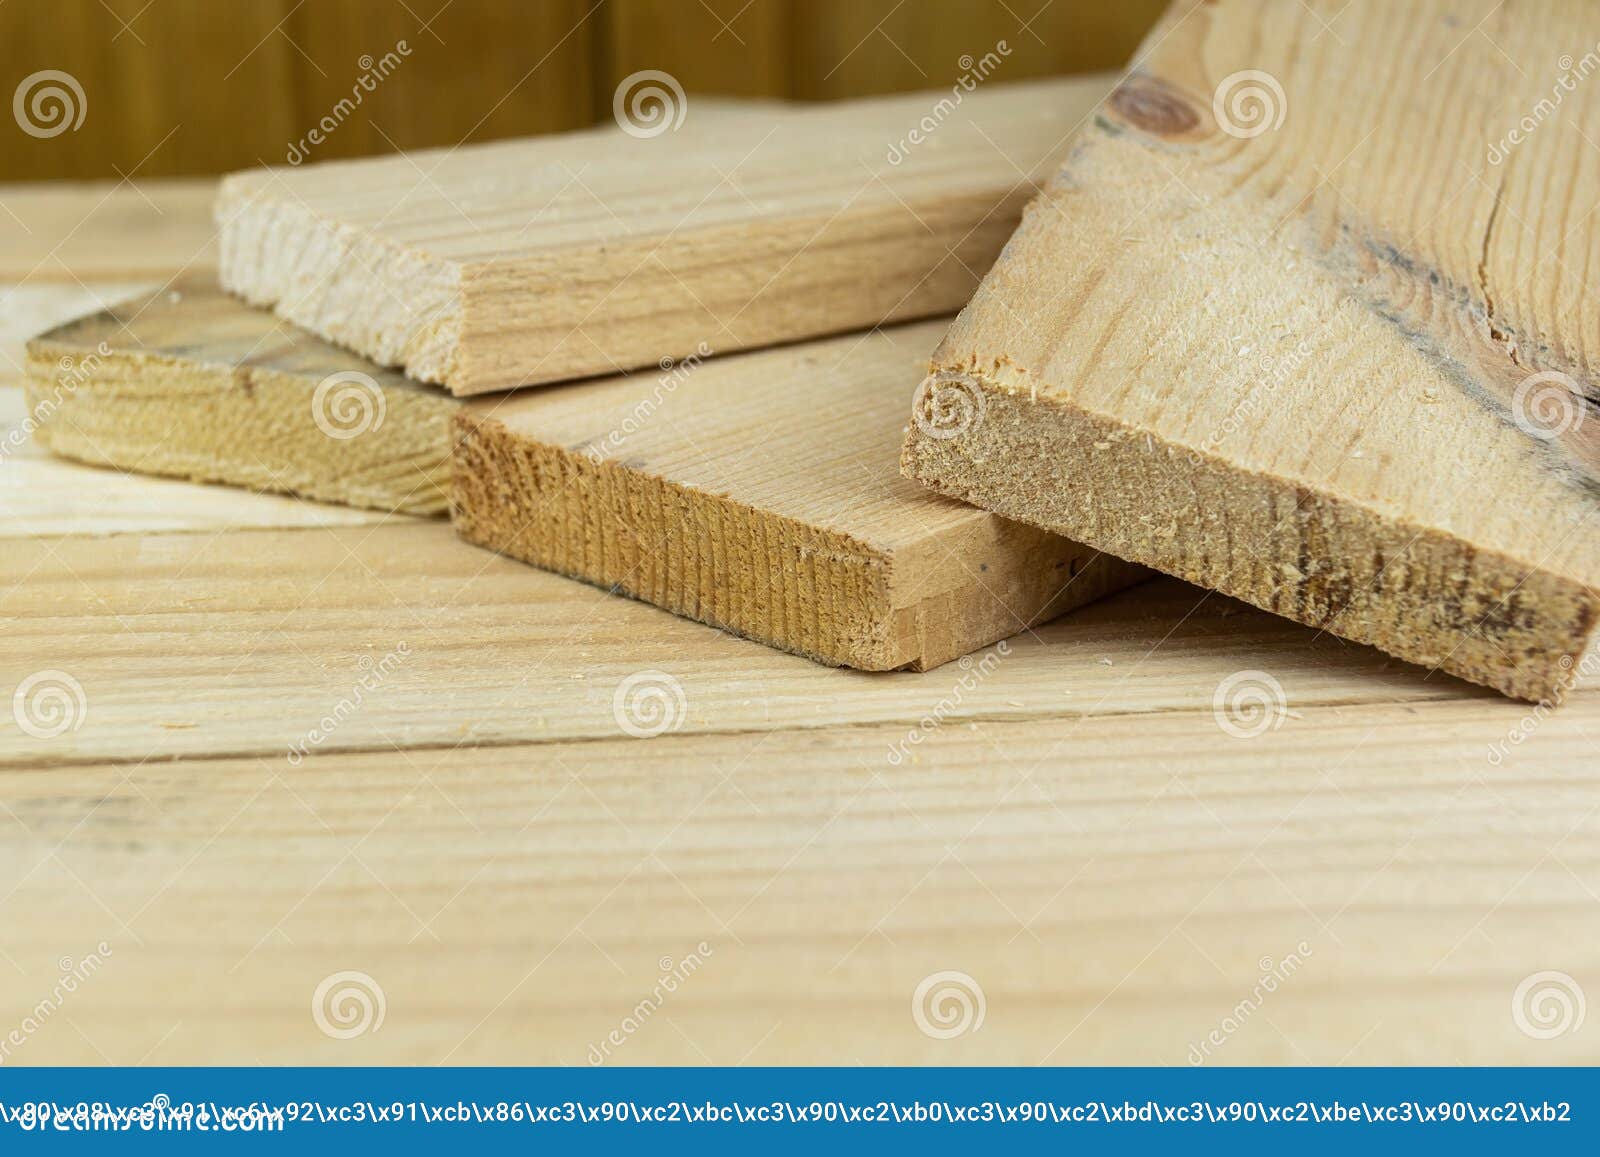 sawn boards lie on the wooden surface.construction materials from pine